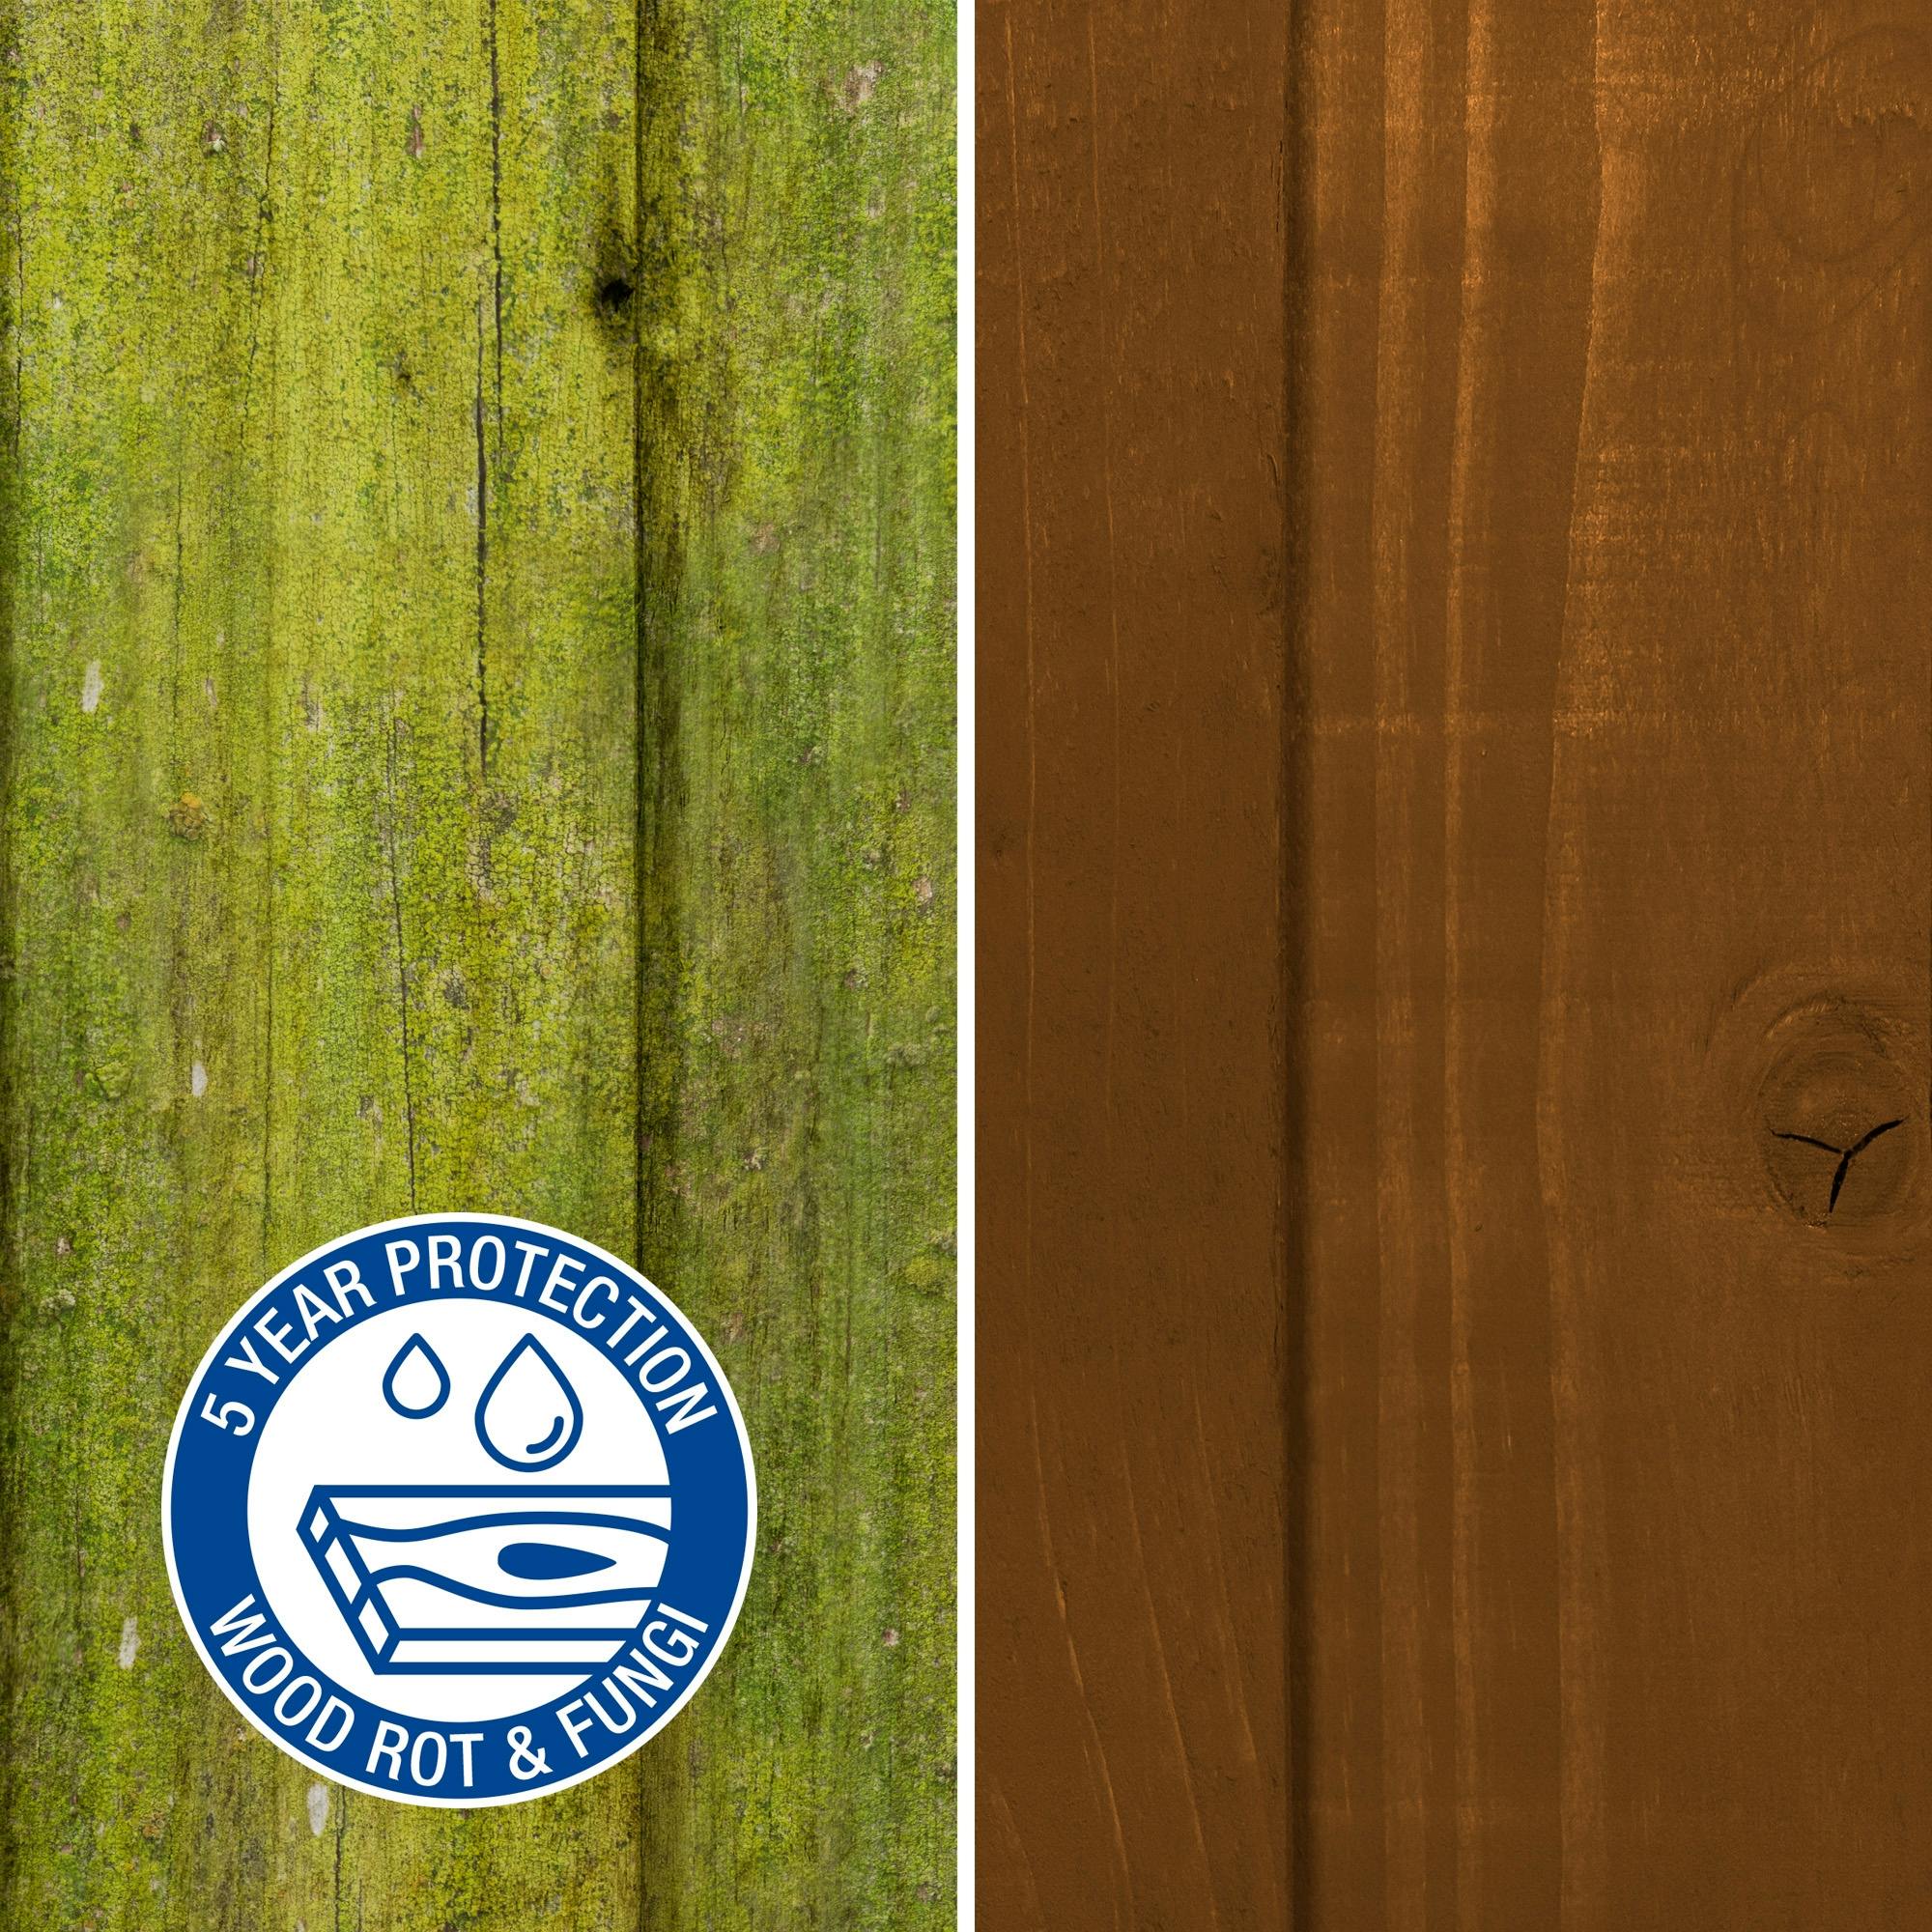 Roxil ~Coloured Wood Preserver offers 5 year protection against wood rot and fungi